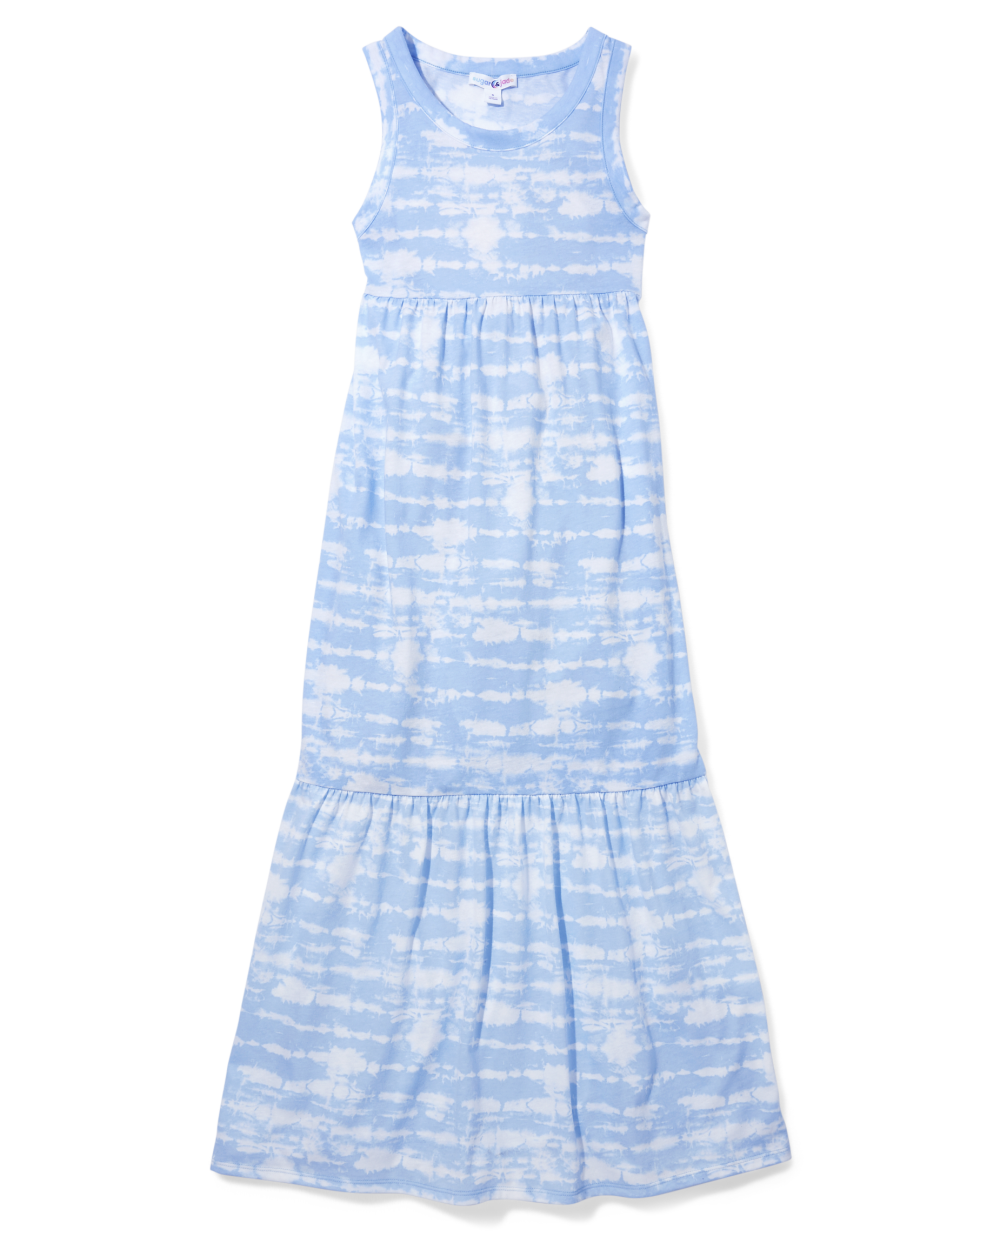 Girls Below the Knee Ruched Round Neck Sleeveless Tank Tie Dye Print Maxi Dress With Ruffles